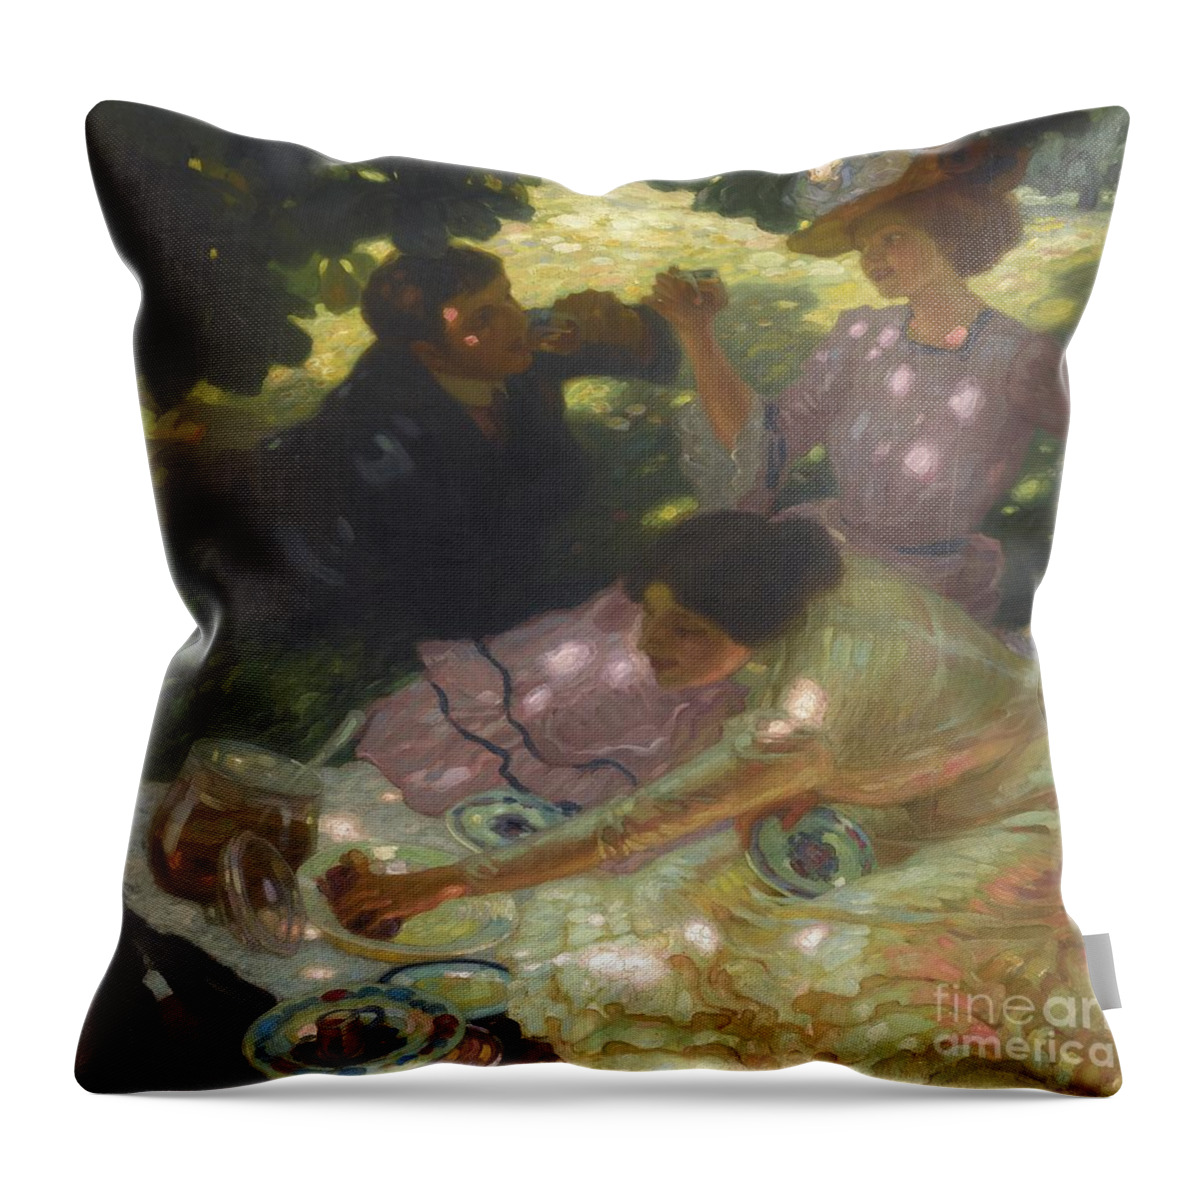 Leo Putz 1869-1940 Austrian The Picnic.forest Throw Pillow featuring the painting Austrian The Picnic by MotionAge Designs